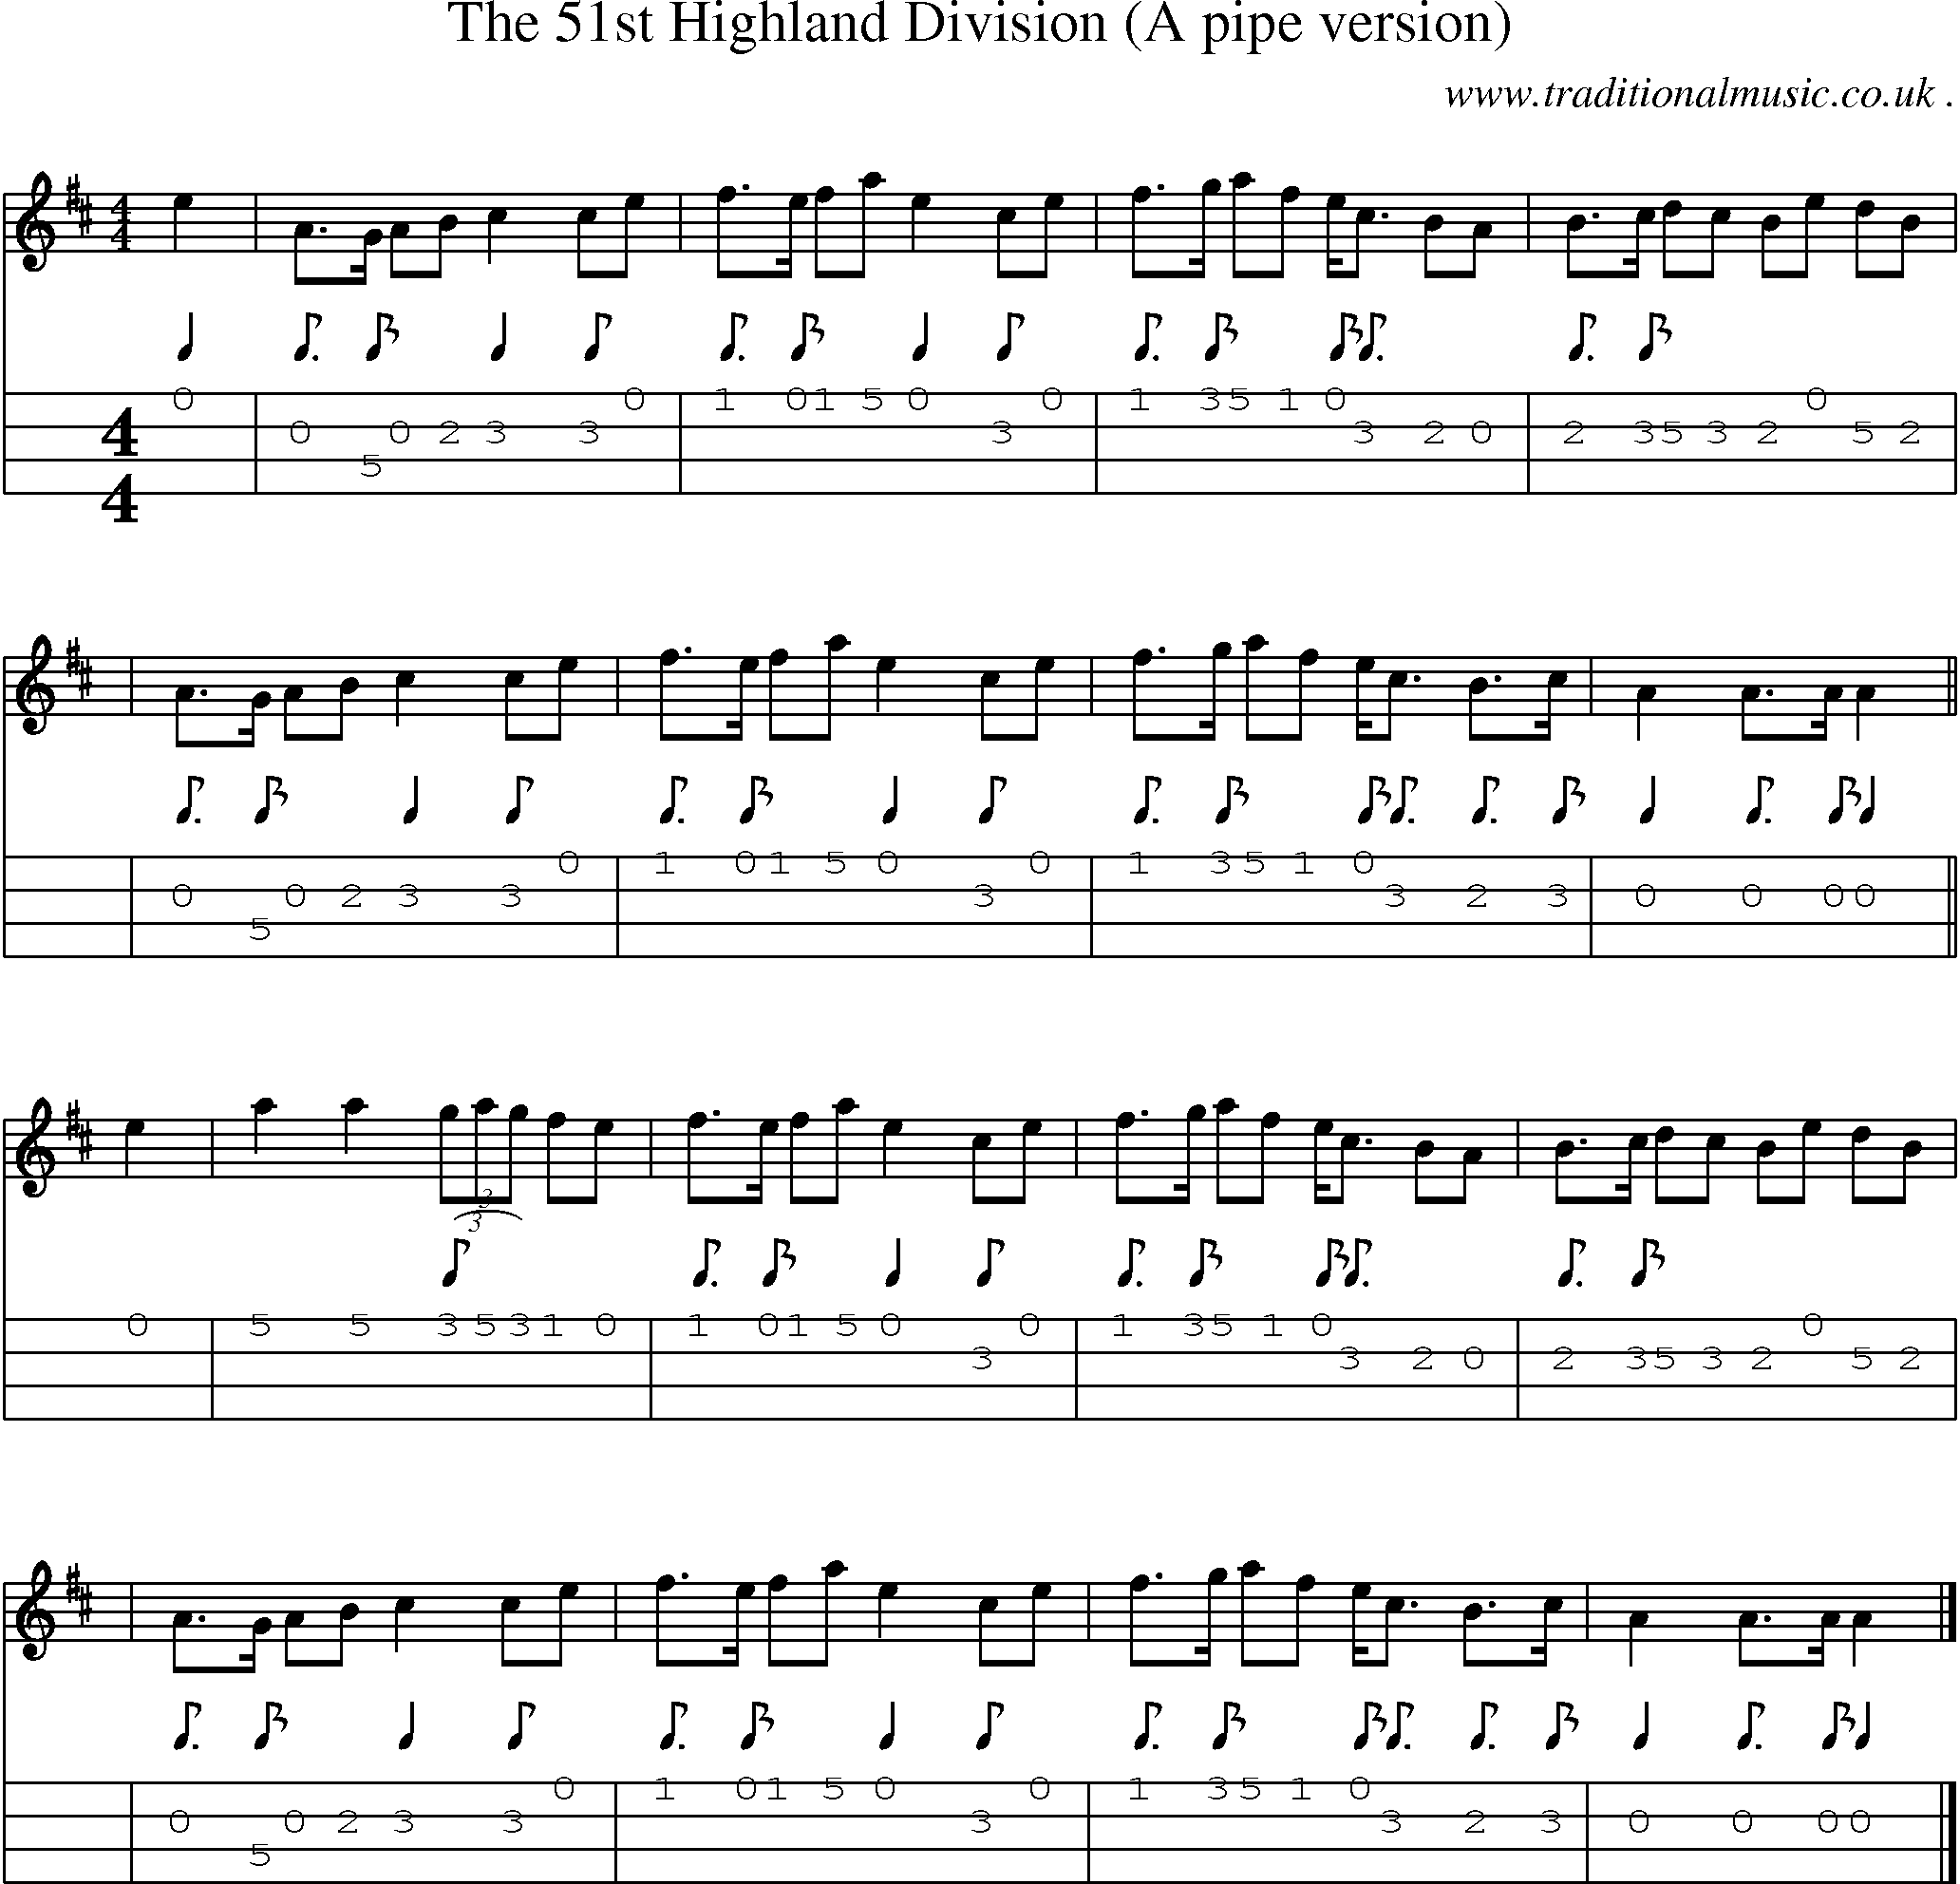 Sheet-music  score, Chords and Mandolin Tabs for The 51st Highland Division A Pipe Version